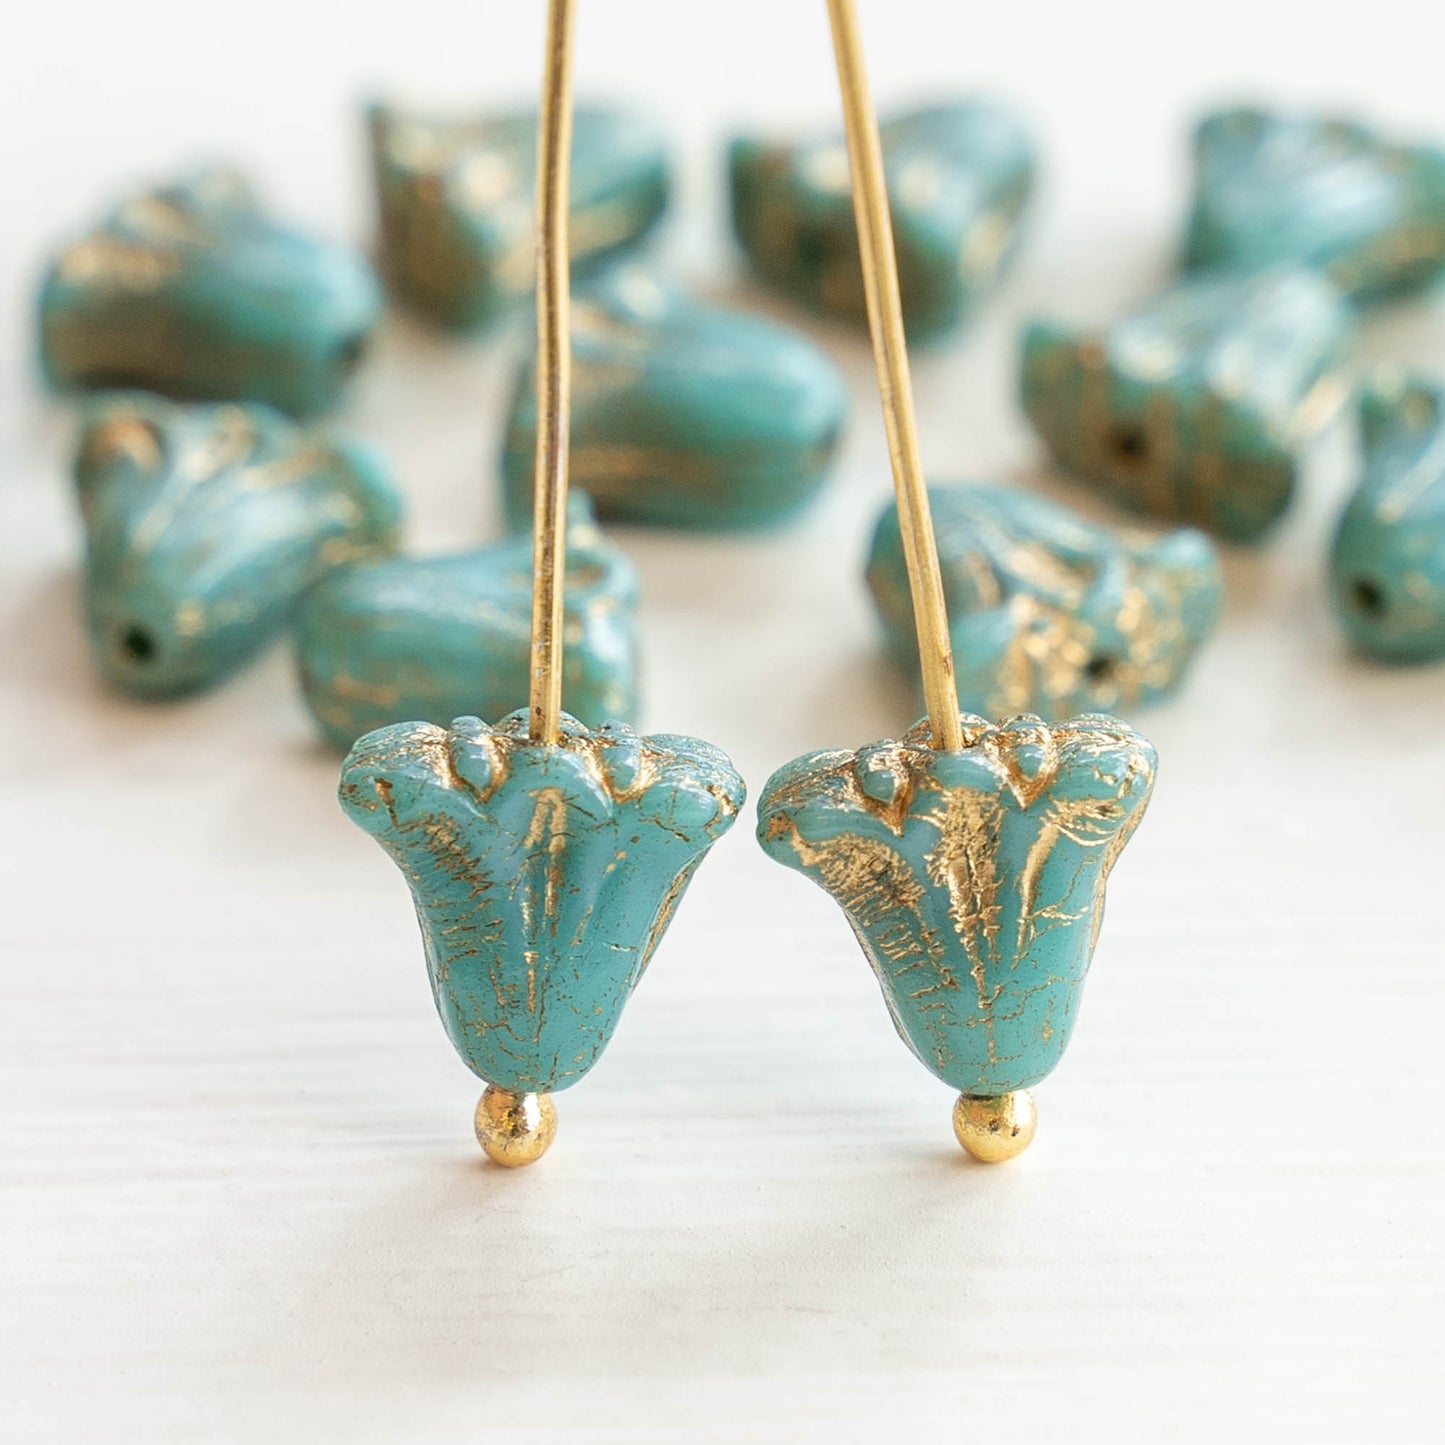 Load image into Gallery viewer, 9x10mm Lily Flower Beads - Turquoise with Gold Wash - 15 Beads
